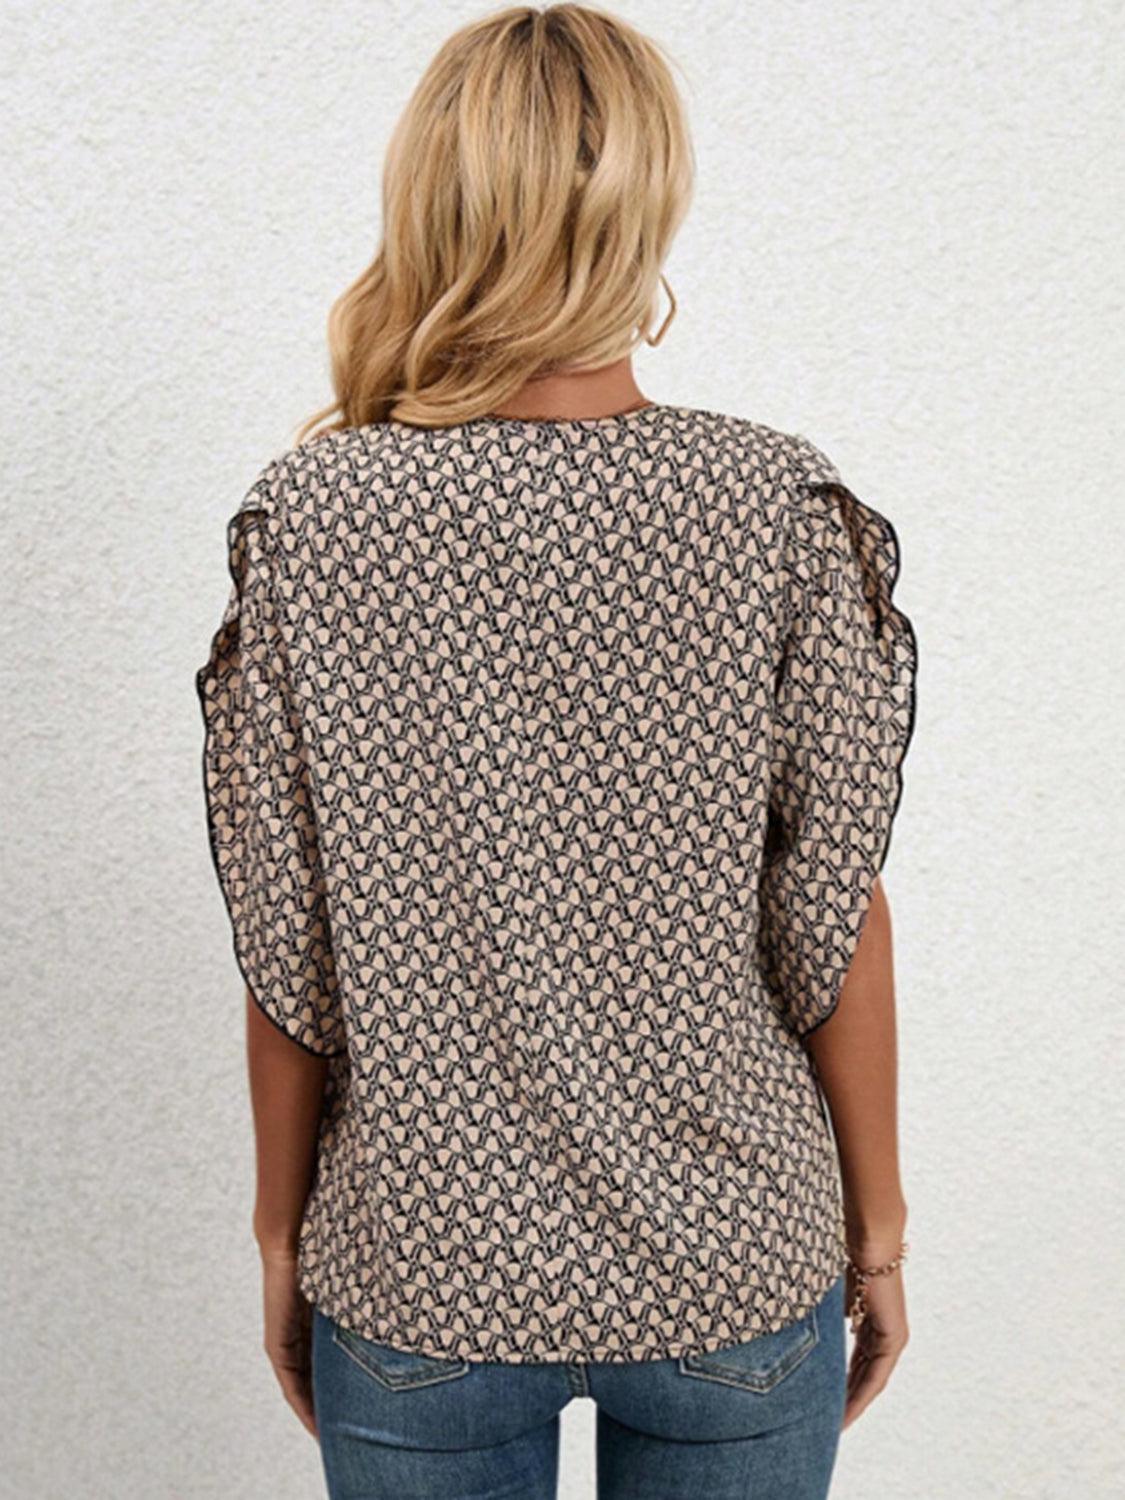 a woman wearing a top with a pattern on it